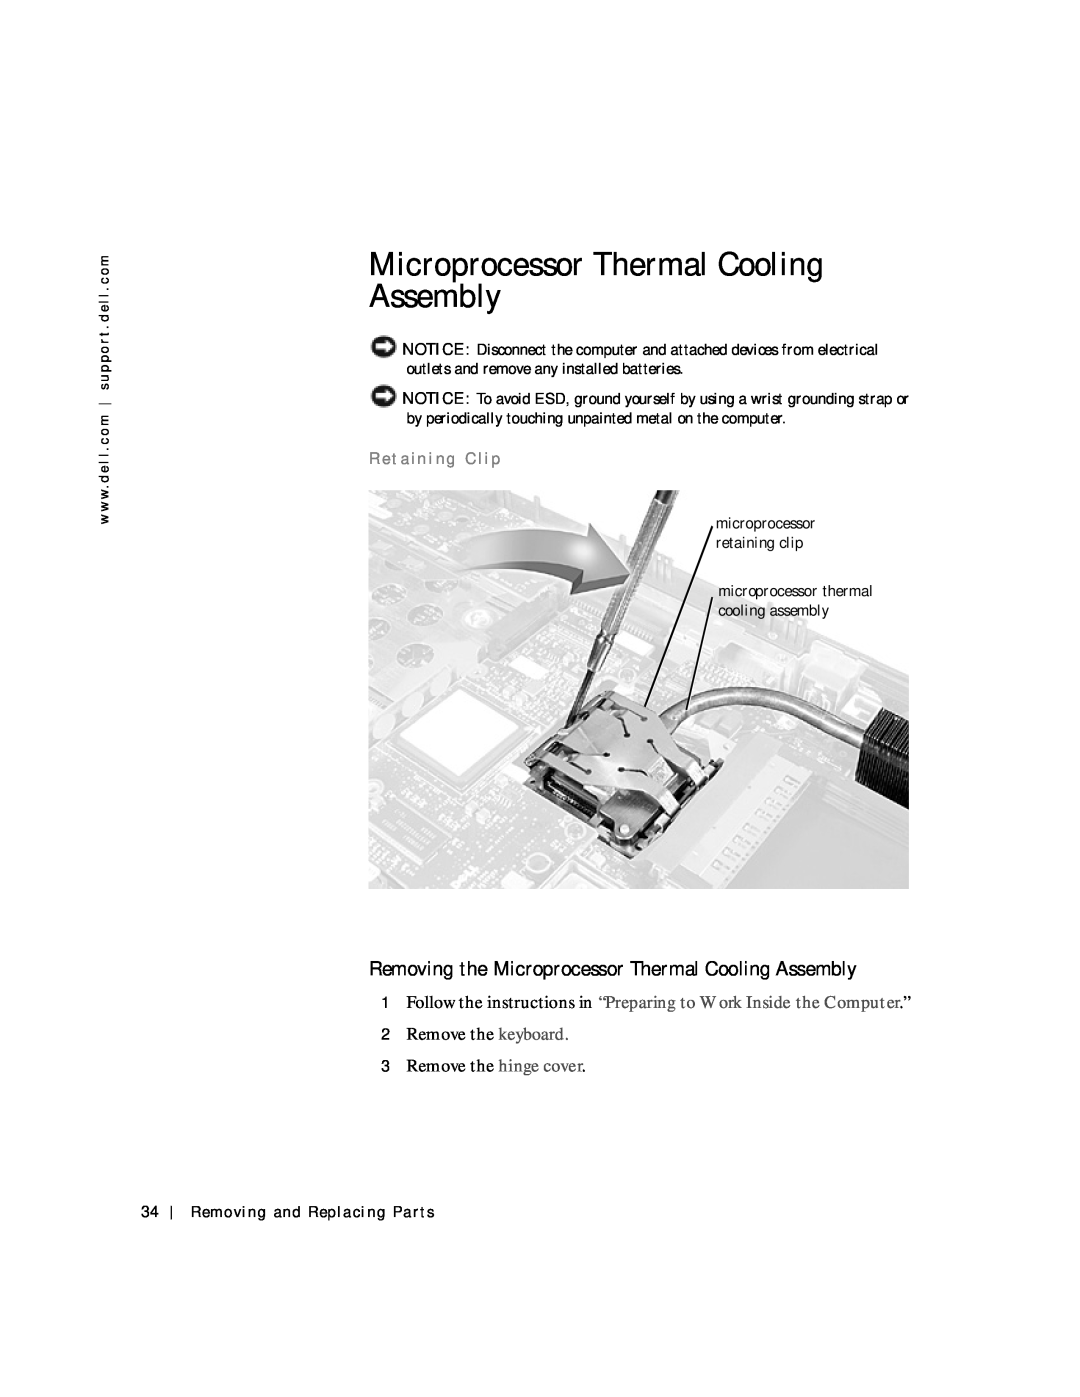 Applied Energy Products C800 service manual Removing the Microprocessor Thermal Cooling Assembly, R et a in i ng C li p 